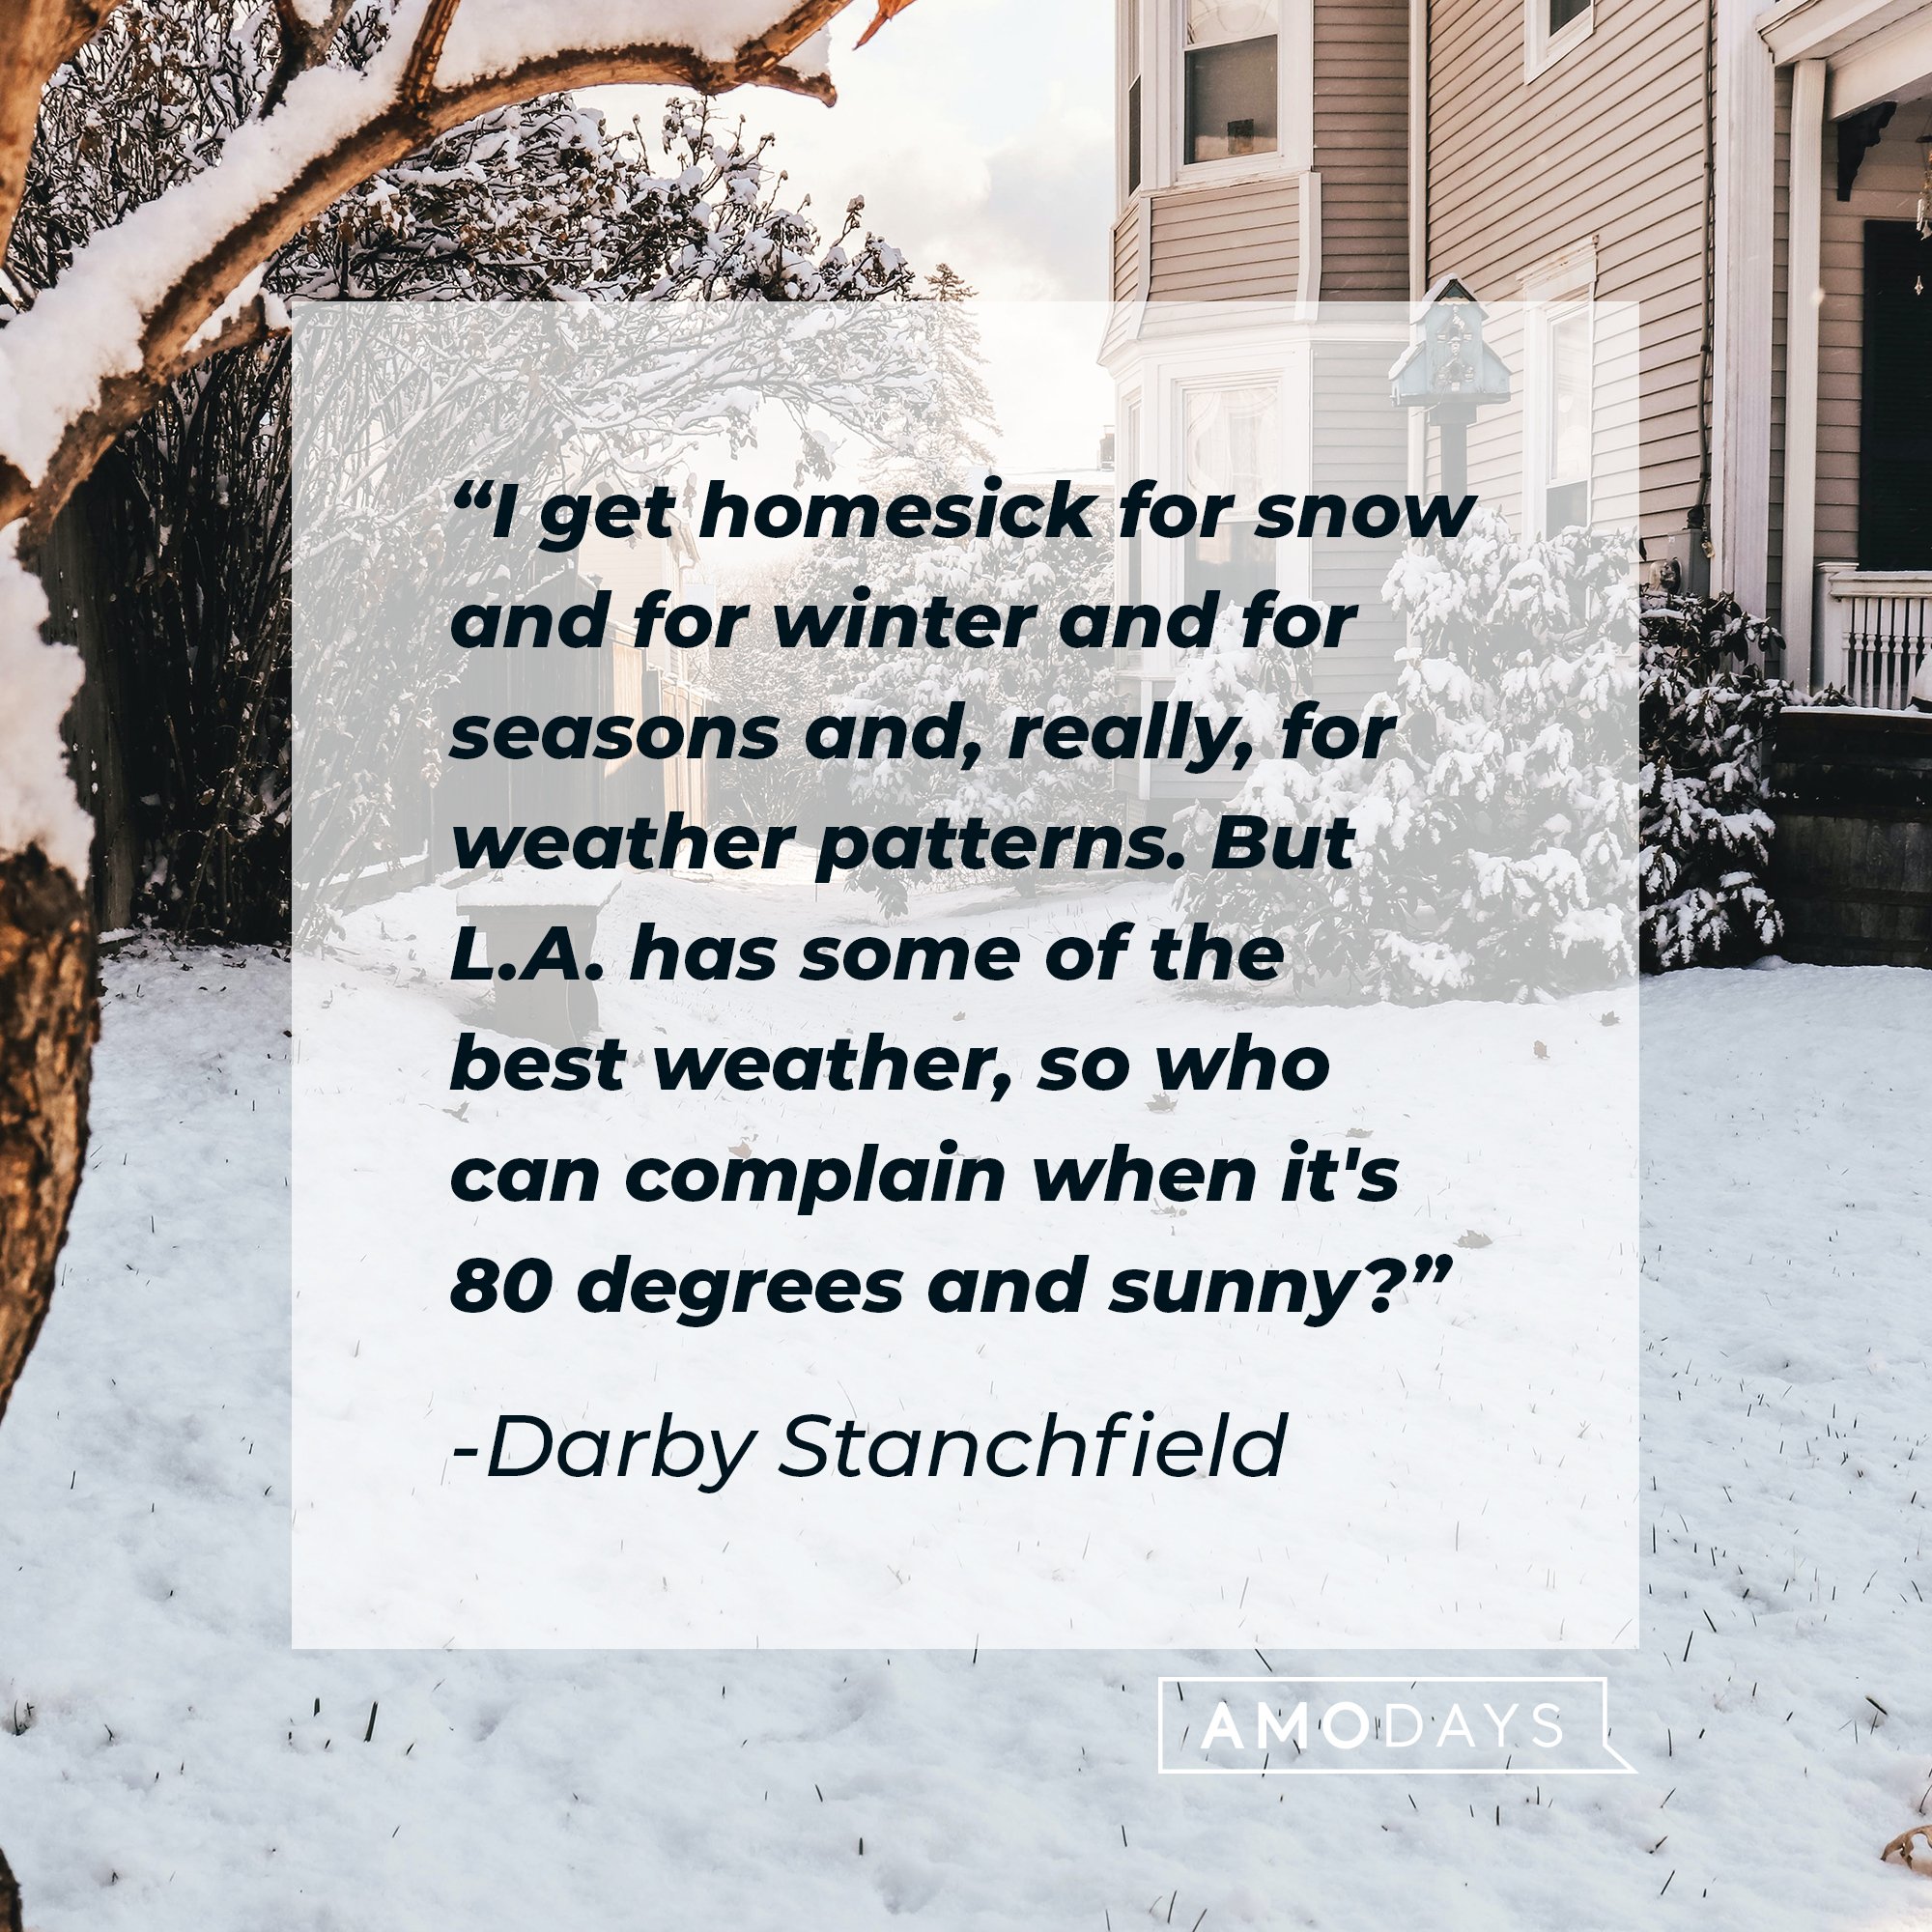 Darby Stanchfield's quote: "I get homesick for snow and for winter and for seasons and, really, for weather patterns. But L.A. has some of the best weather, so who can complain when it's 80 degrees and sunny?" | Image: AmoDays